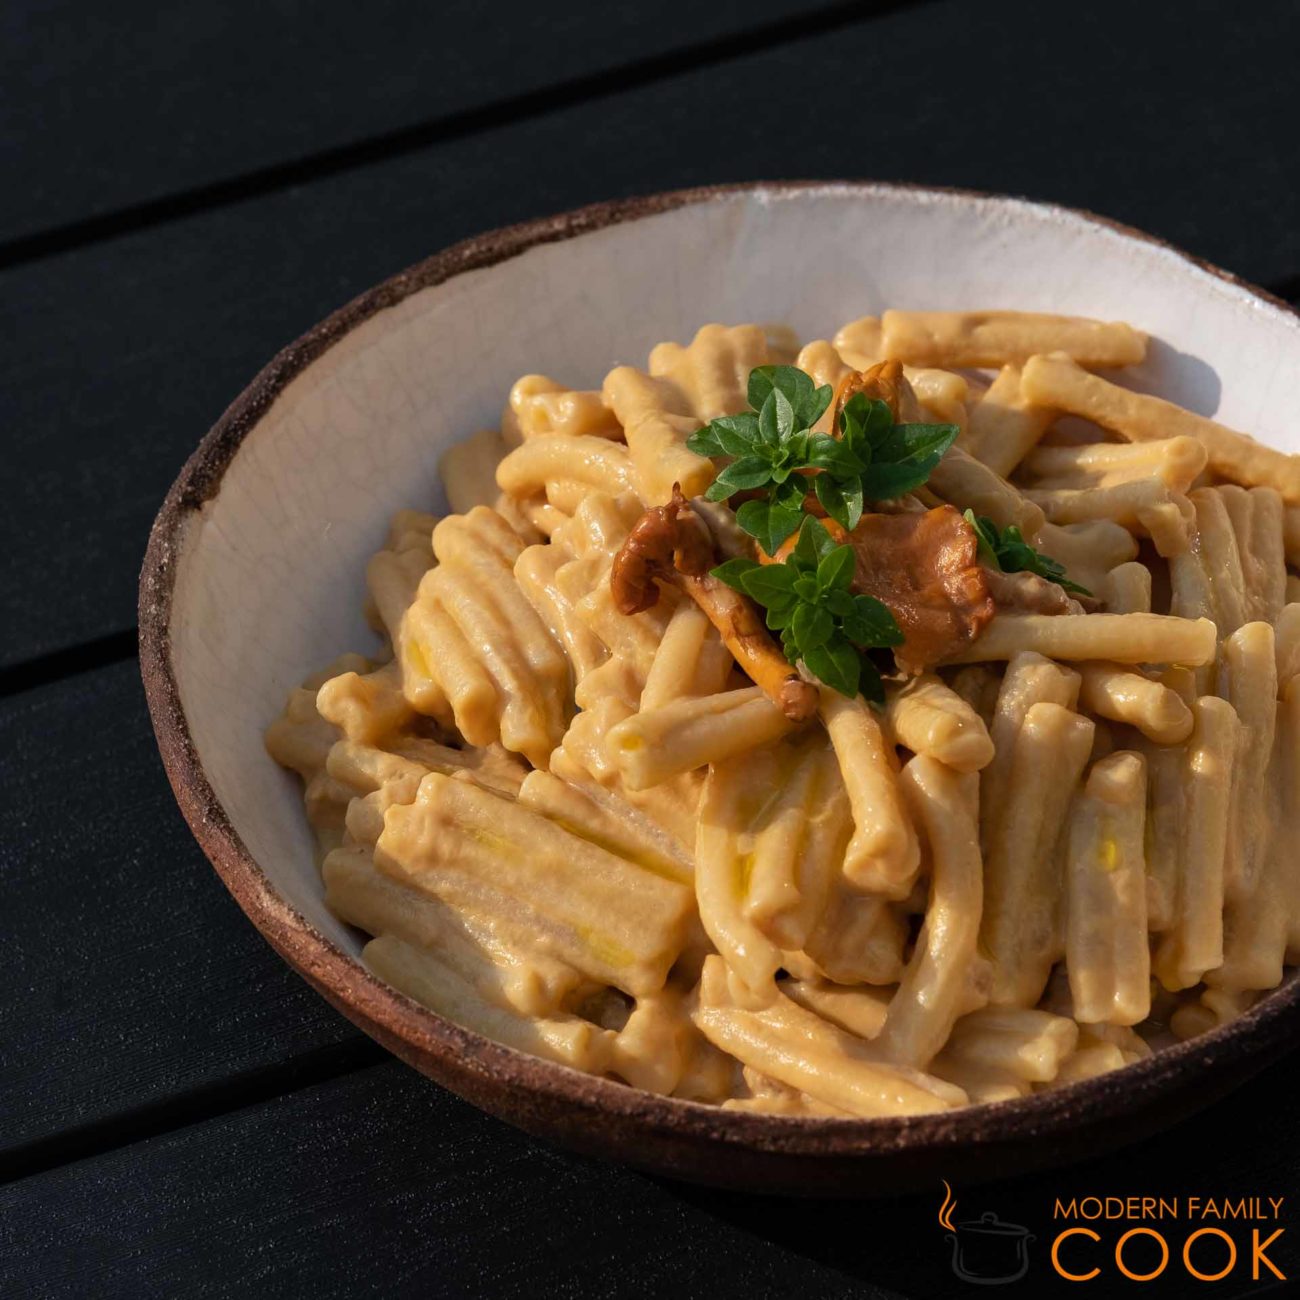 Pasta With Chanterelle Mushrooms and Rosemary (gluten-free, dairy-free)